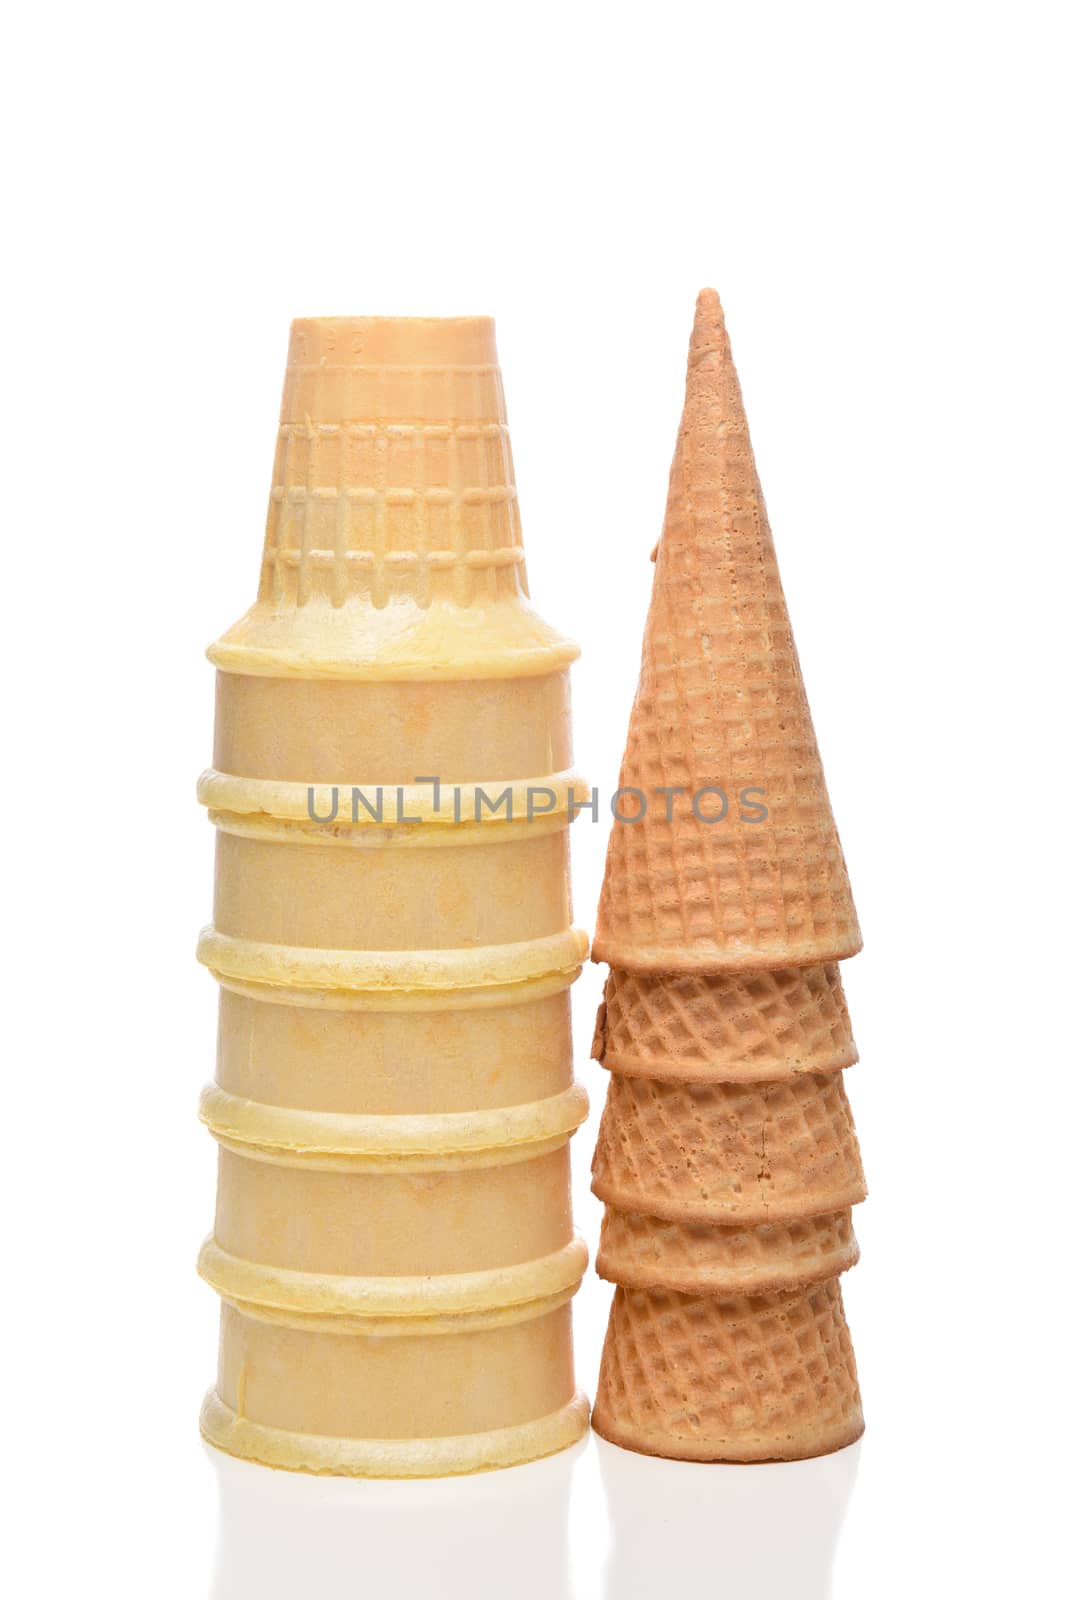 Two stacks of different Ice Cream Cones by sCukrov